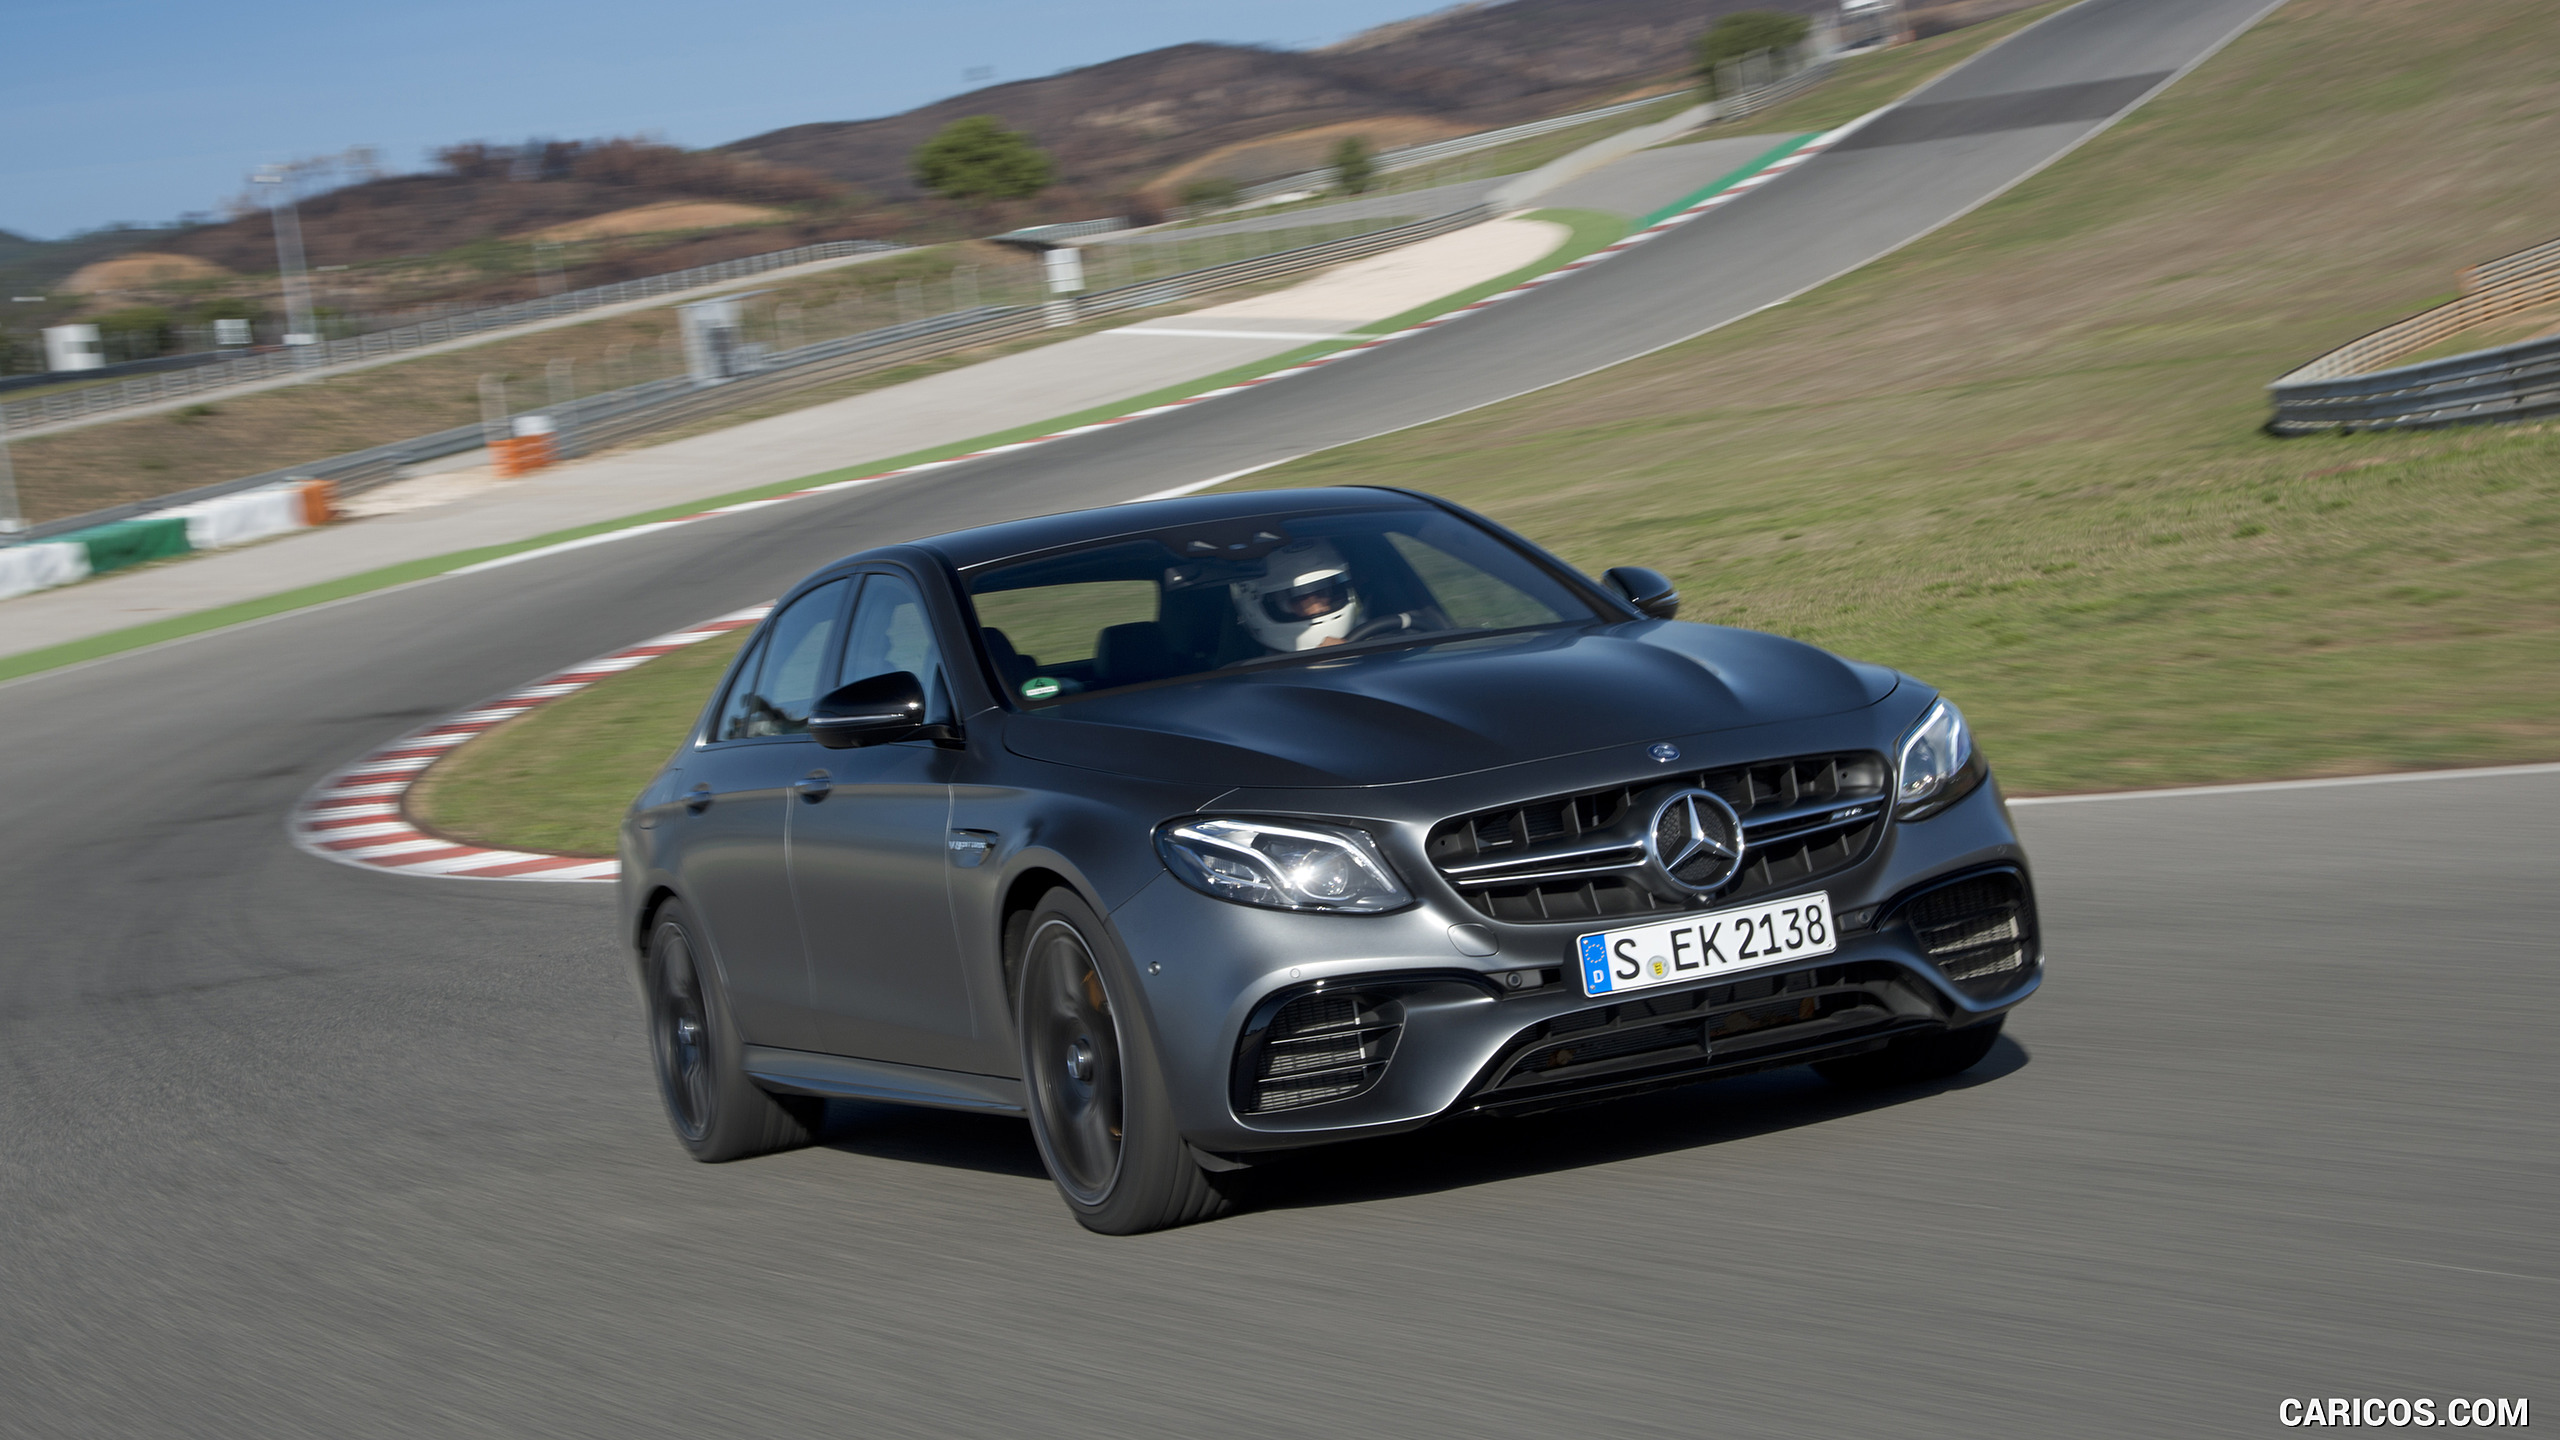 2018 Mercedes-AMG E63 S 4MATIC+ - Front, #264 of 323